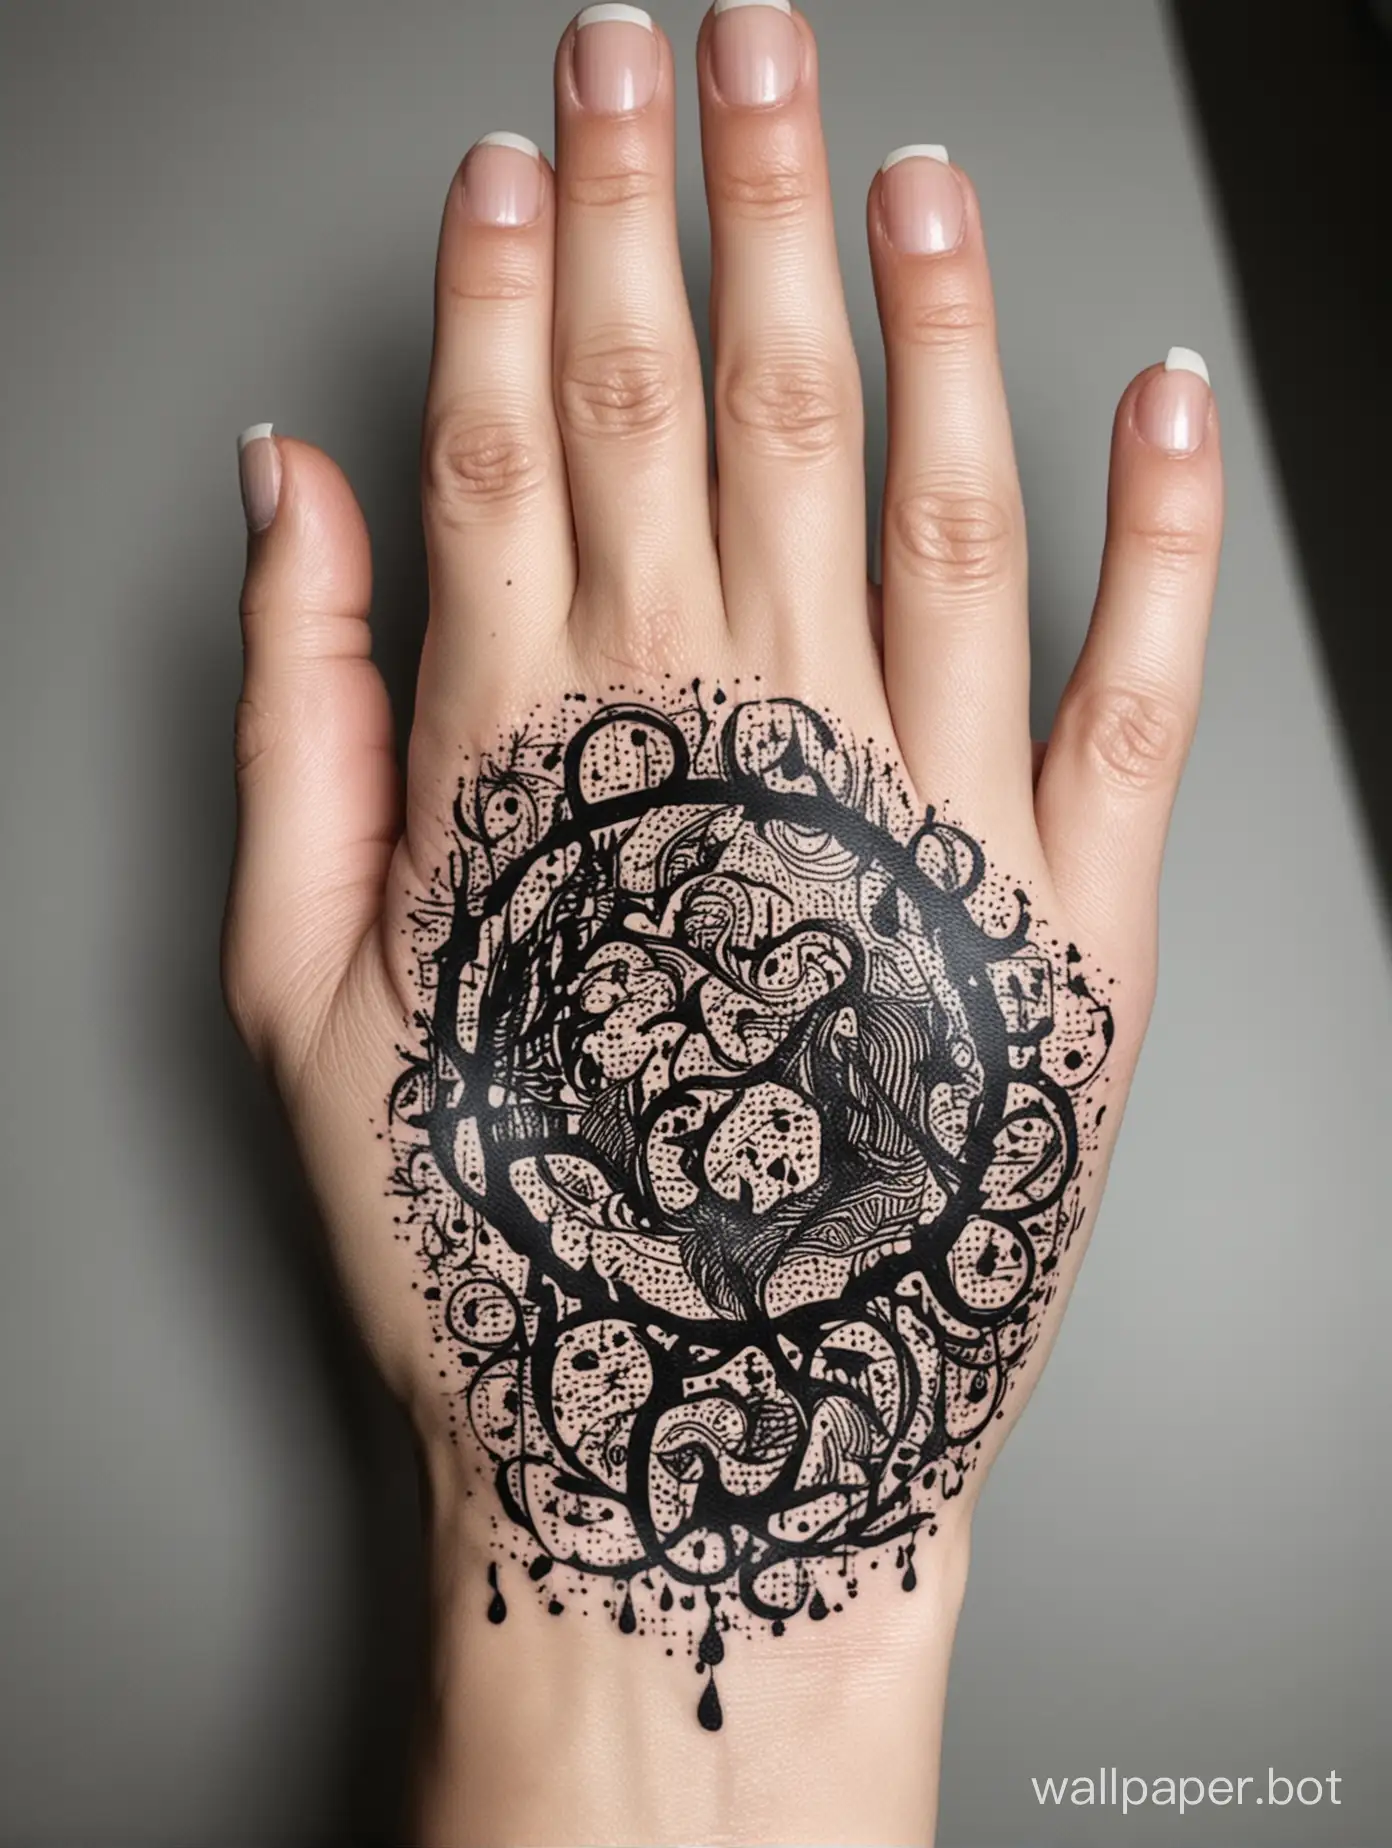 Chaotic-Circular-Hand-Tattoo-Design-with-Dripping-Veins-on-White-Background